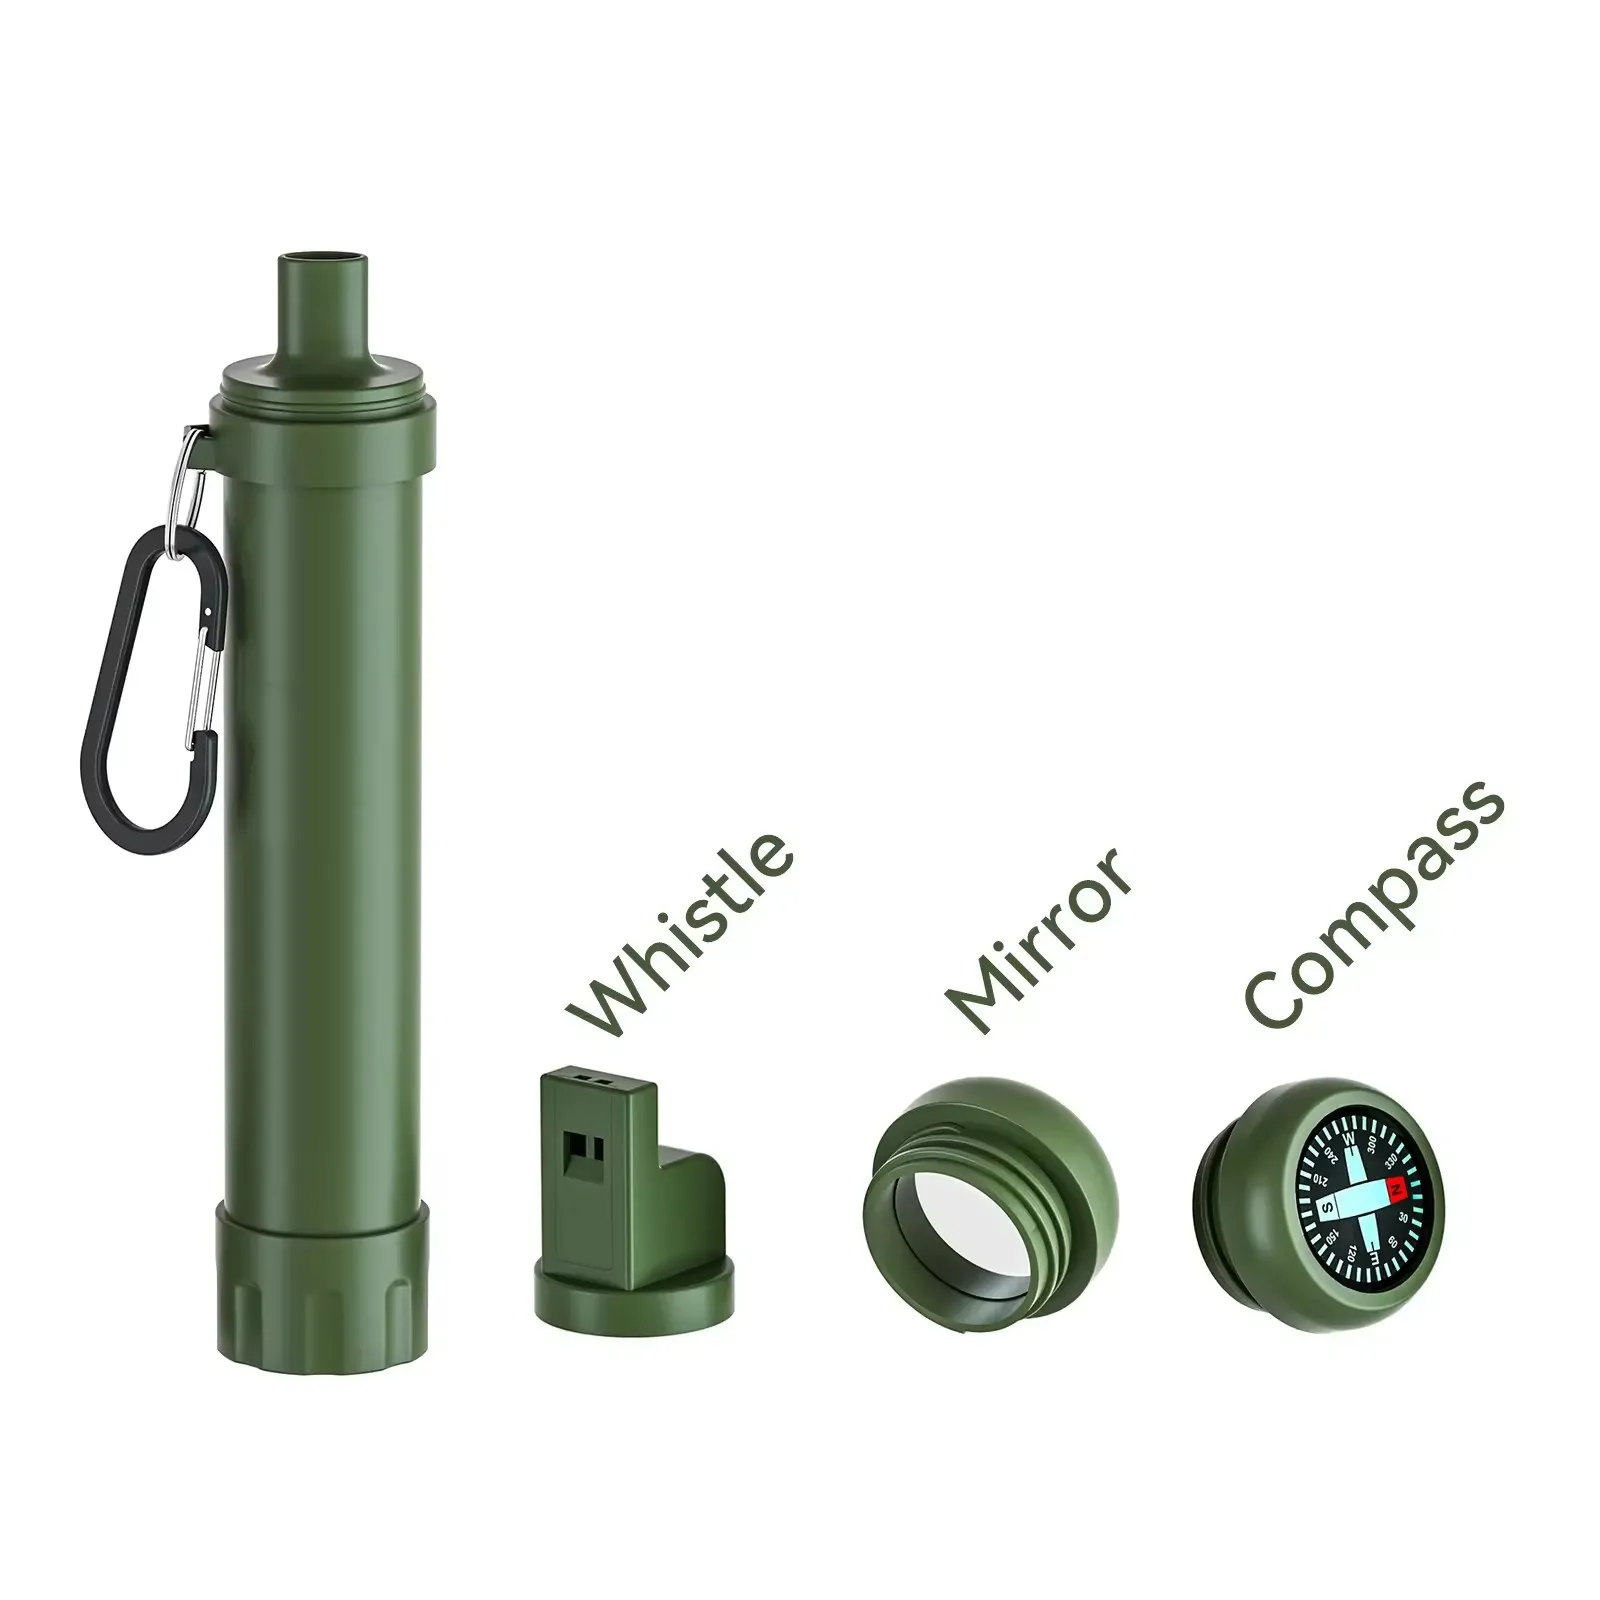 Outdoor survival personal lightweight buy portable water purifier cleaner